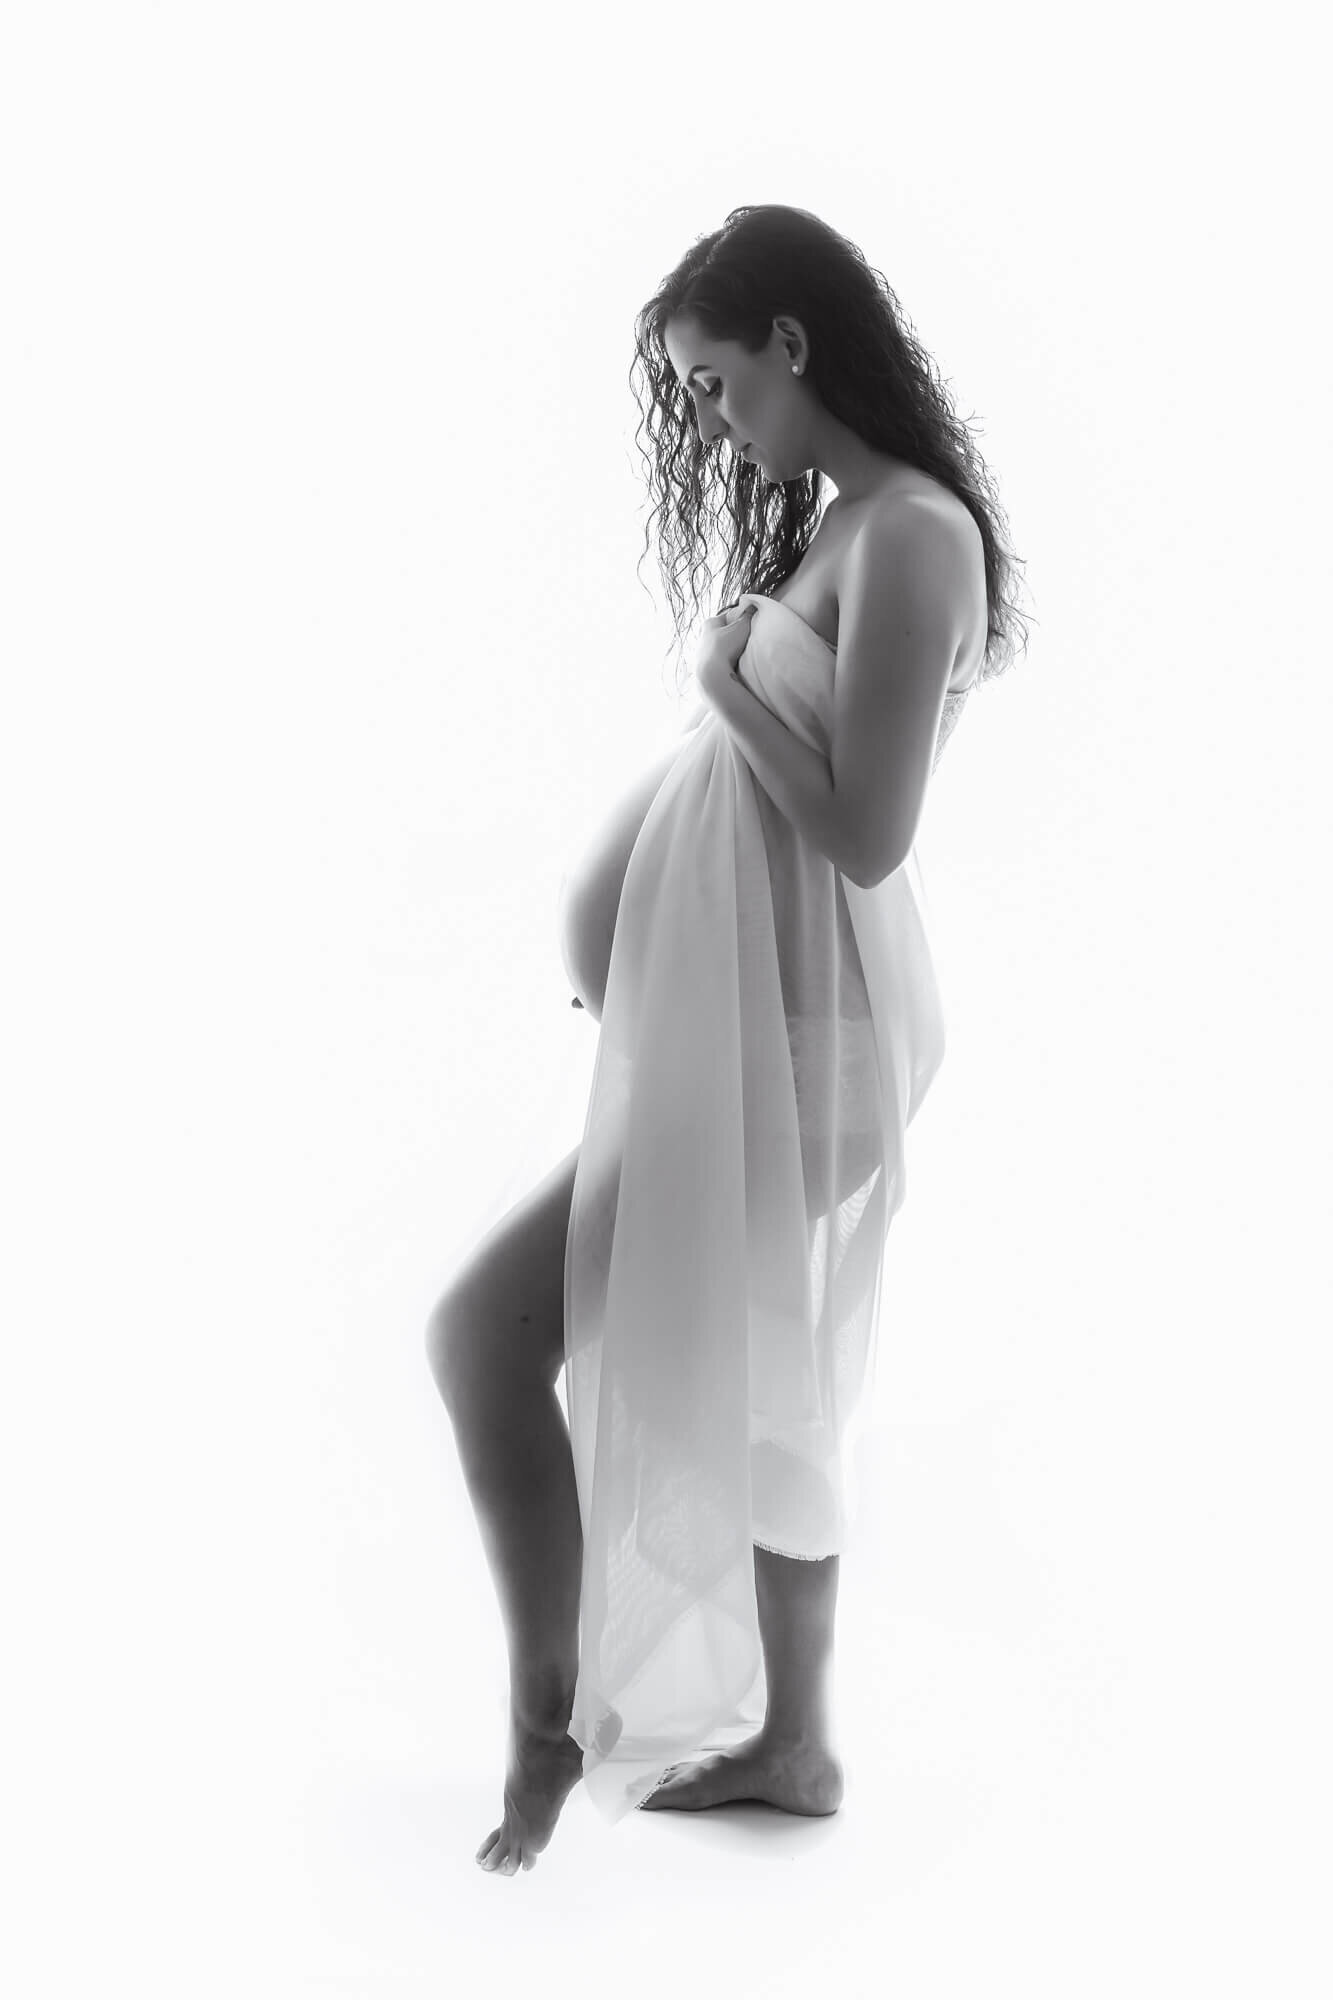 High-key maternity portrait of a pregnant woman draped in white fabric